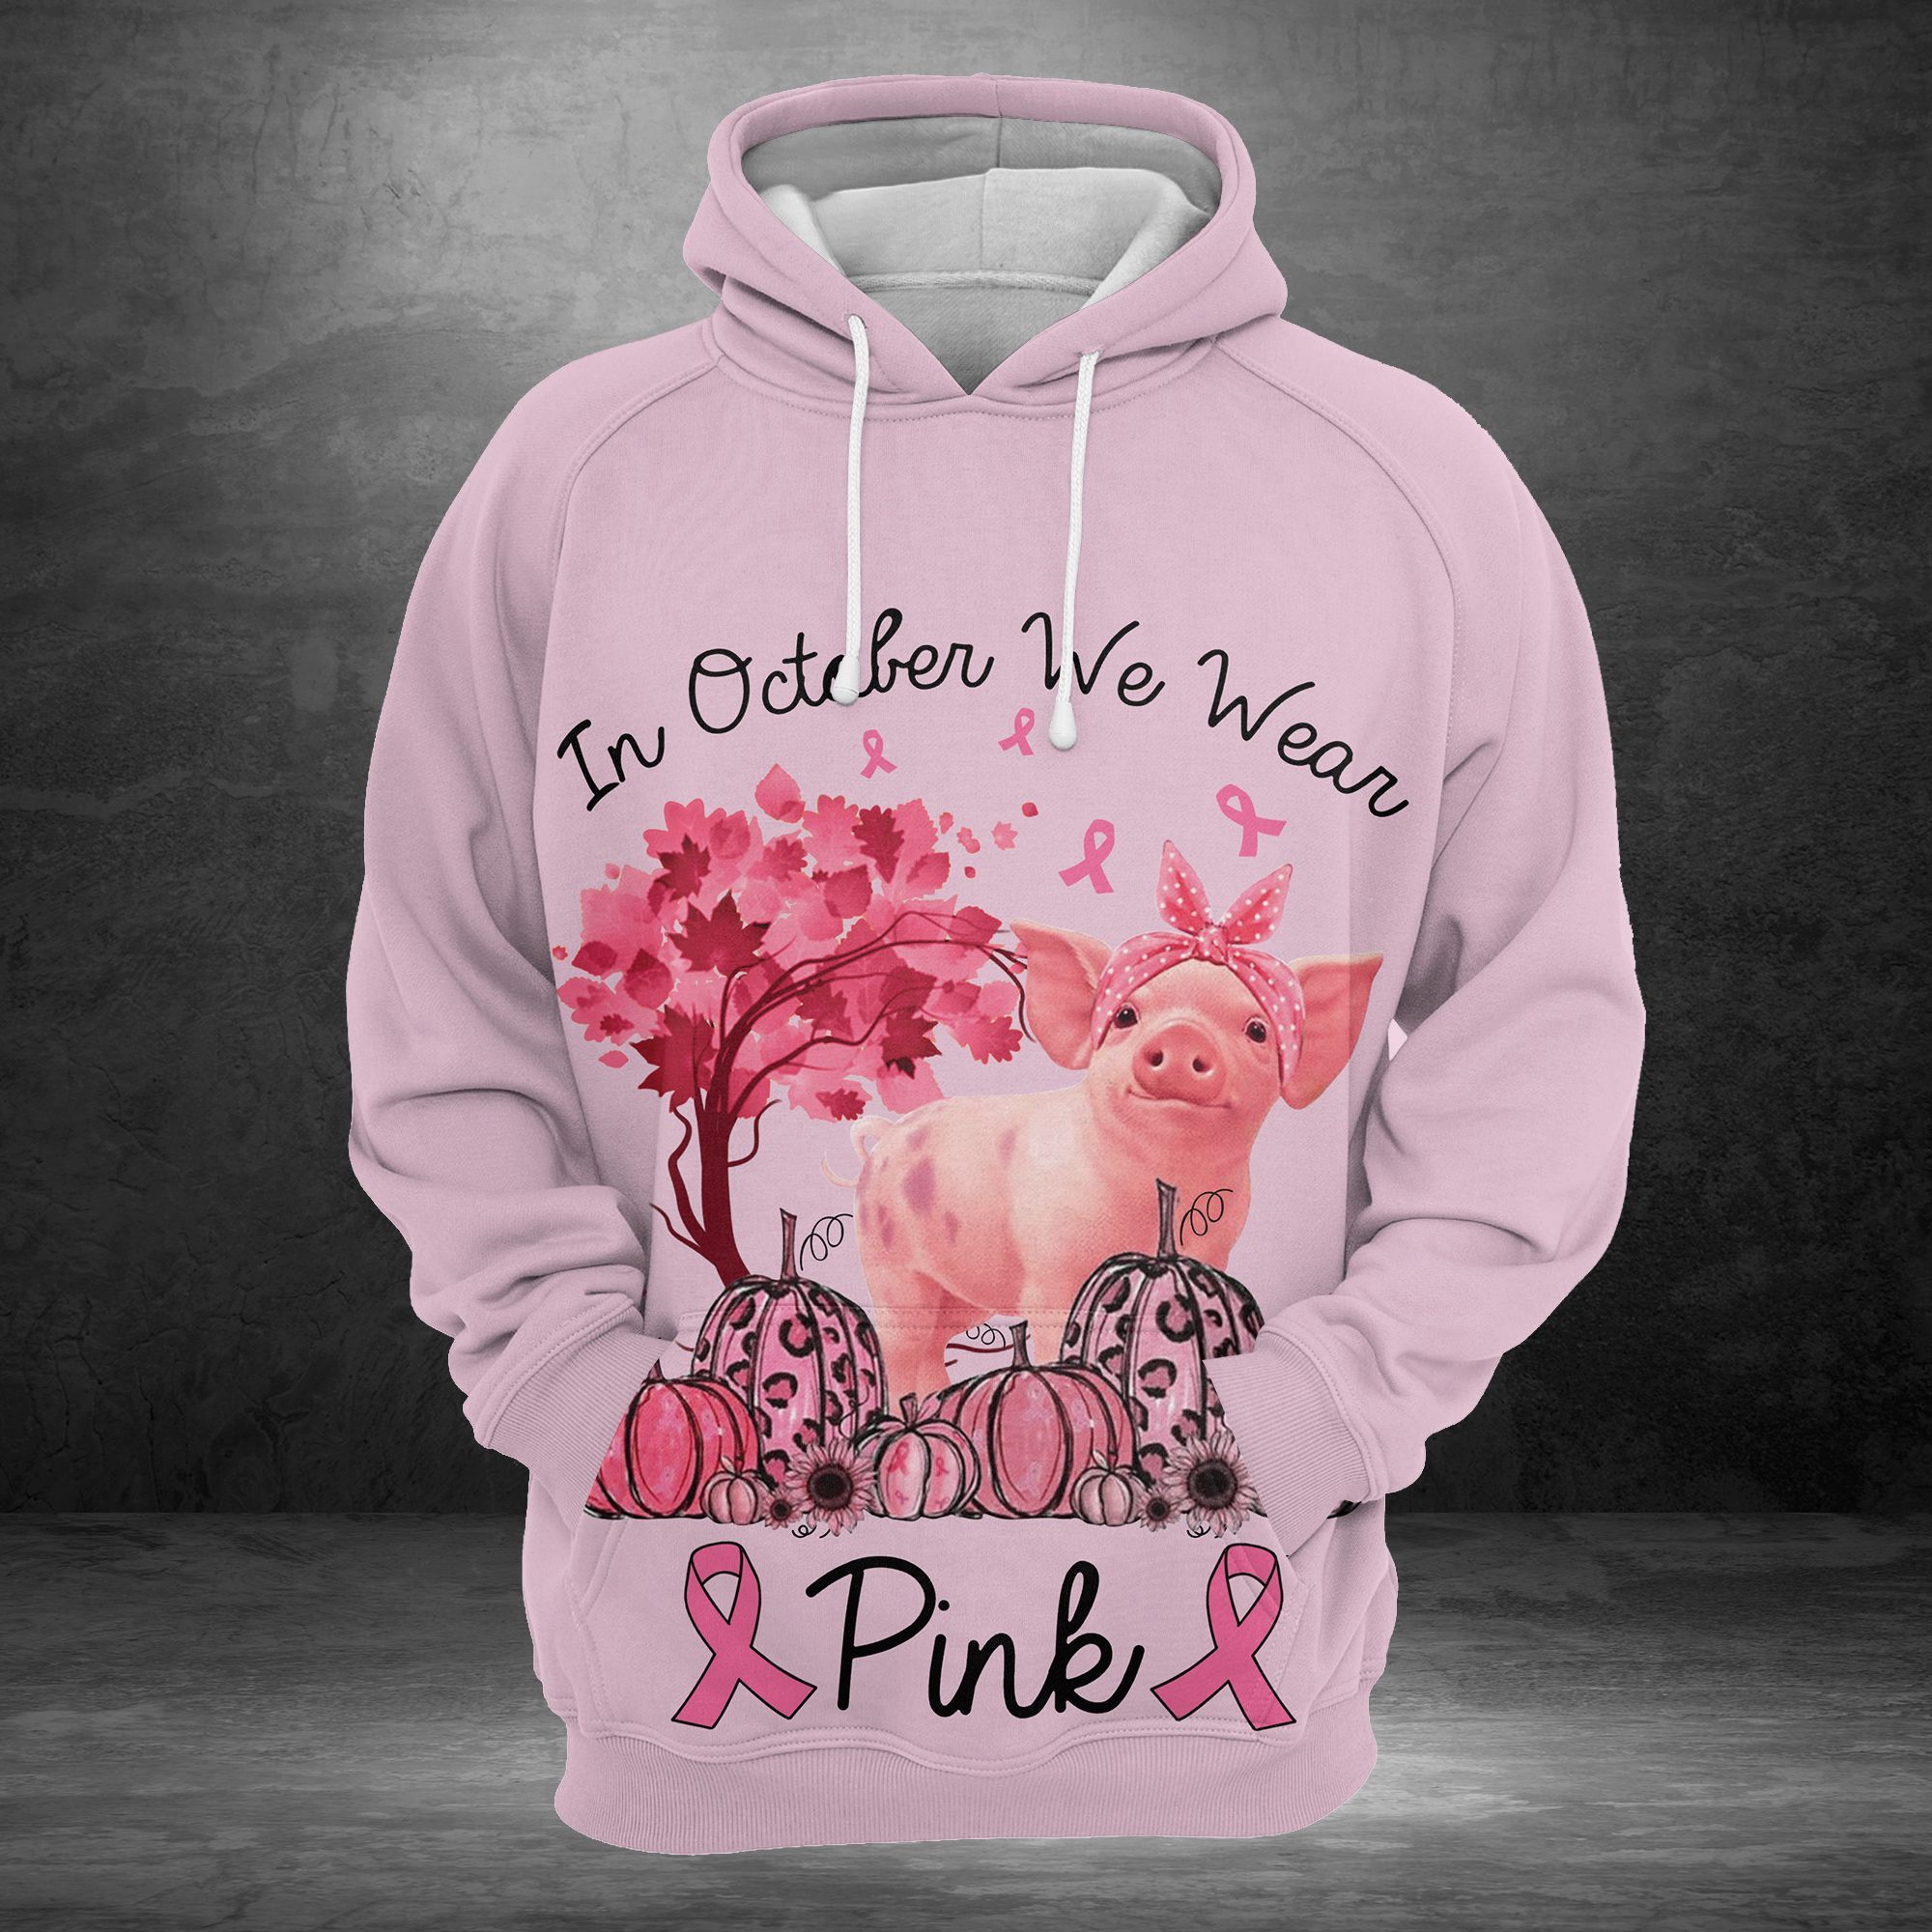 In October We Wear Pink Breast Cancer Awareness G5831 – All Over Print Unisex Hoodie Unisex Womens & Mens, Couples Matching, Friends, Funny Family Ugly Christmas Holiday Sweater Gifts (Plus Size Available)